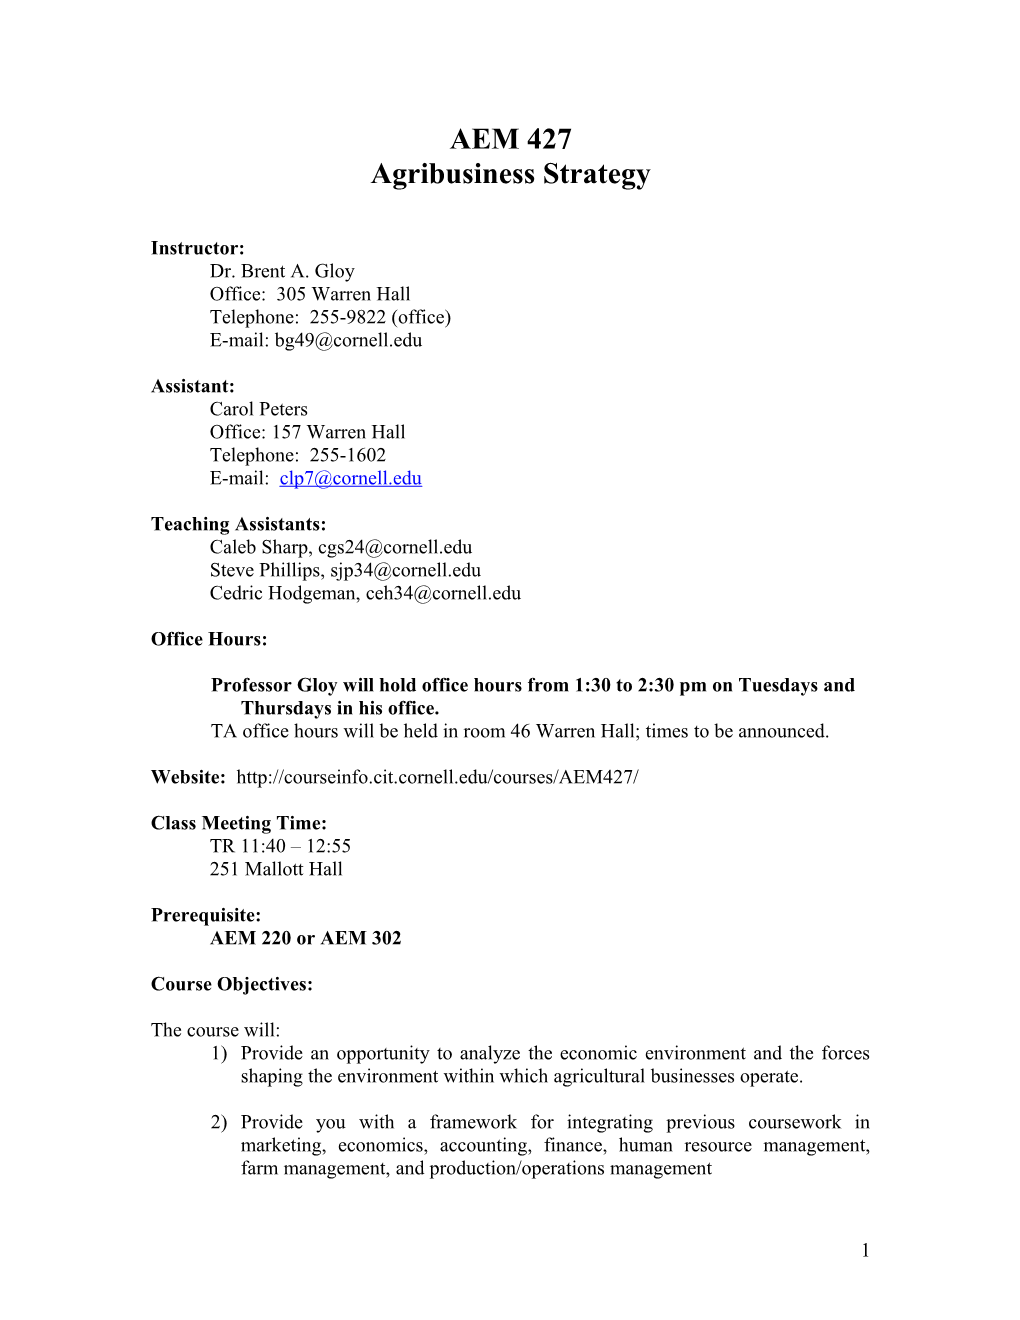 Agribusiness Strategy